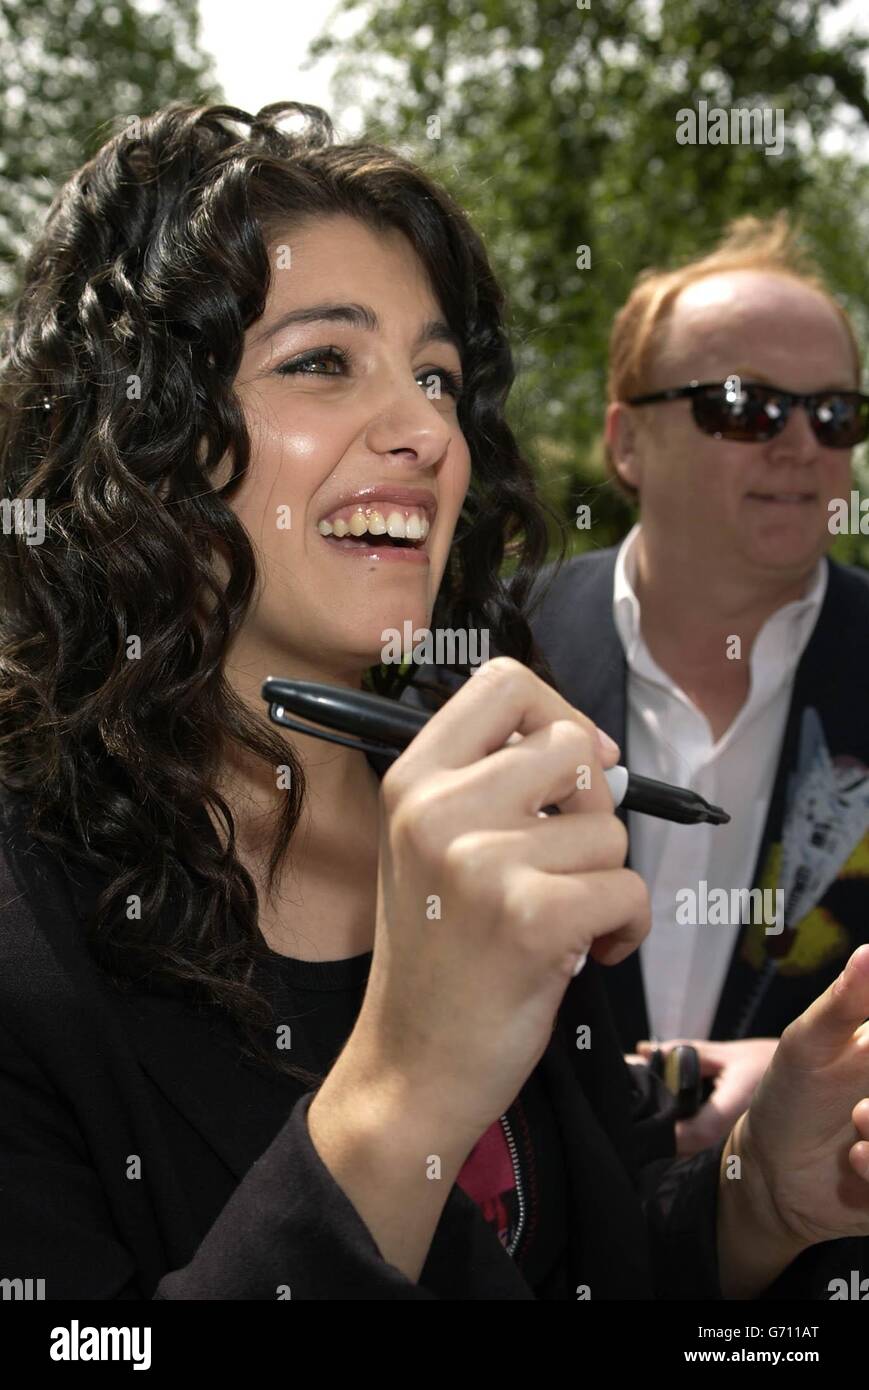 Singer Katie Melua arrives for the Ivor Novello Awards at the Grosvenor House hotel on Park Lane in central London. The 49th annual awards honour the best songs and film scores of 2003. Stock Photo